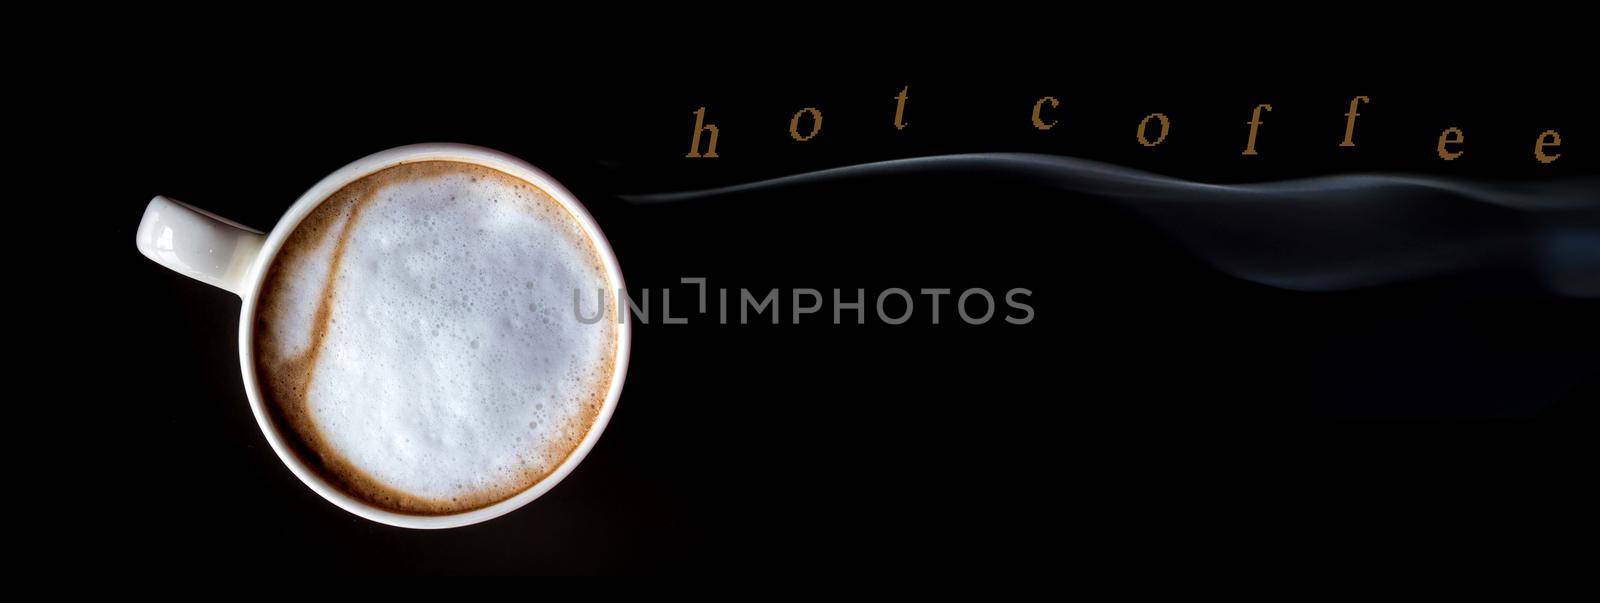 Hot milk coffee and soft froth in white ceramic cup